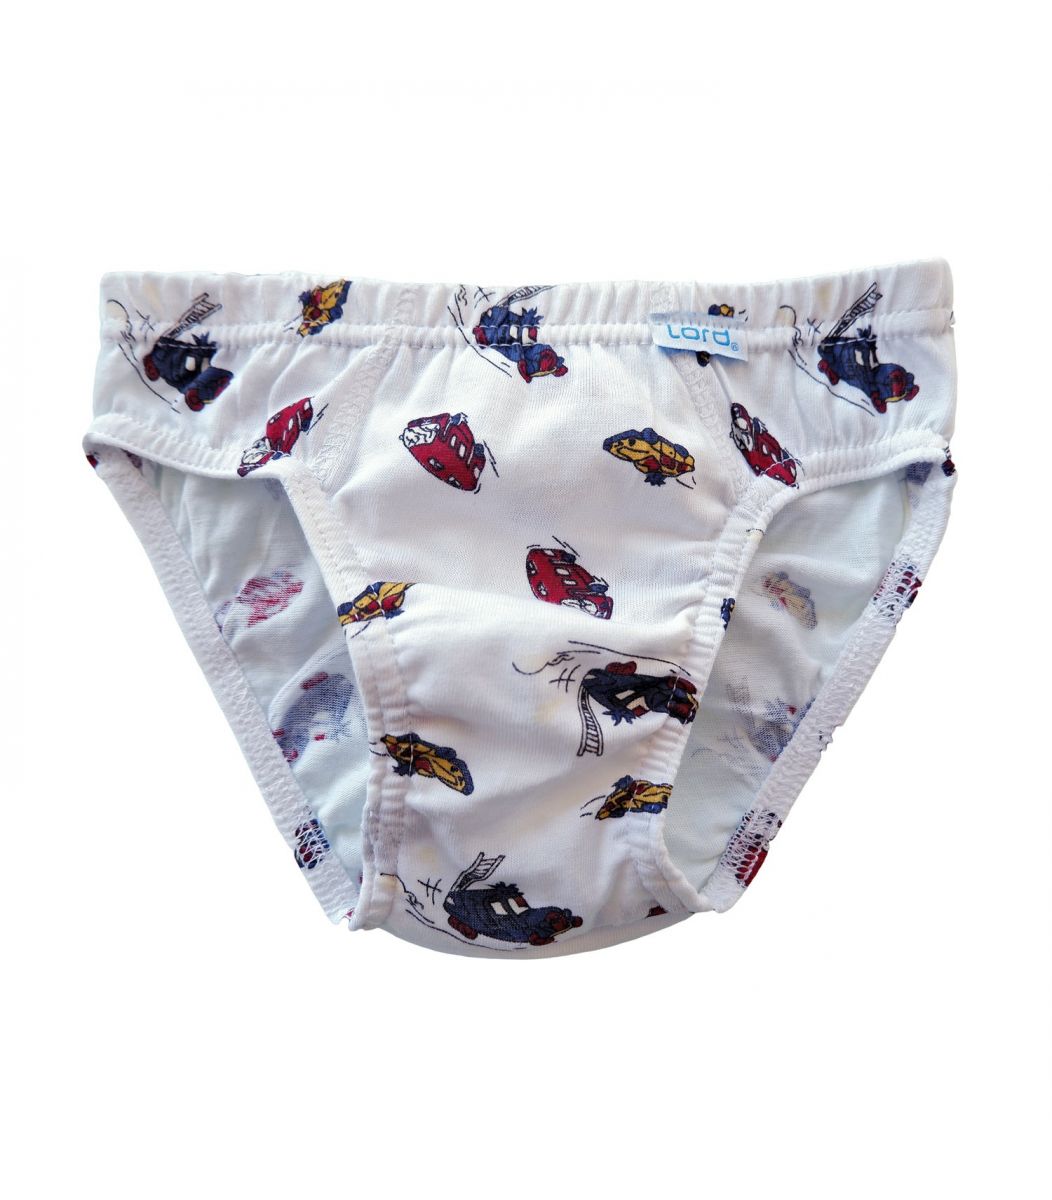 Boys Brief Printed, white Color White Size 2yrs old